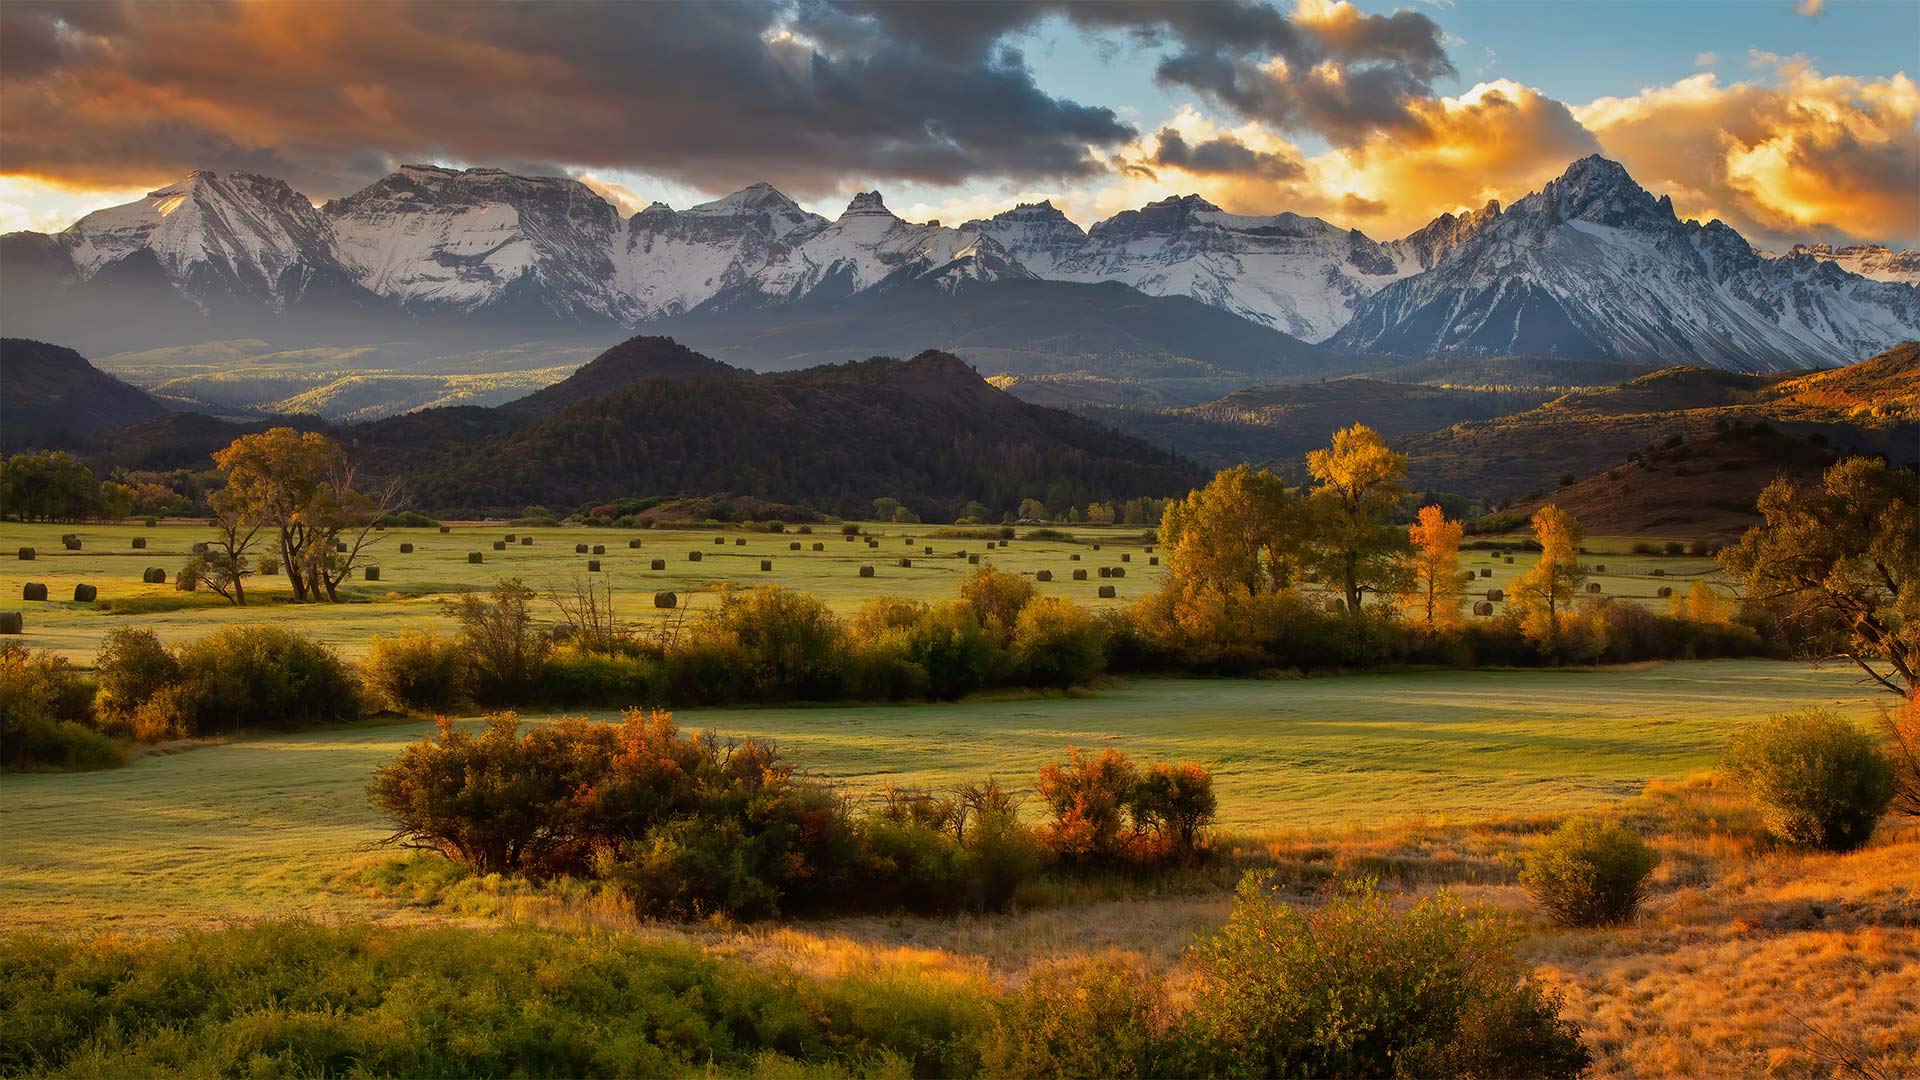 Bing image: A valley view at 9,000 feet - Bing Wallpaper Gallery